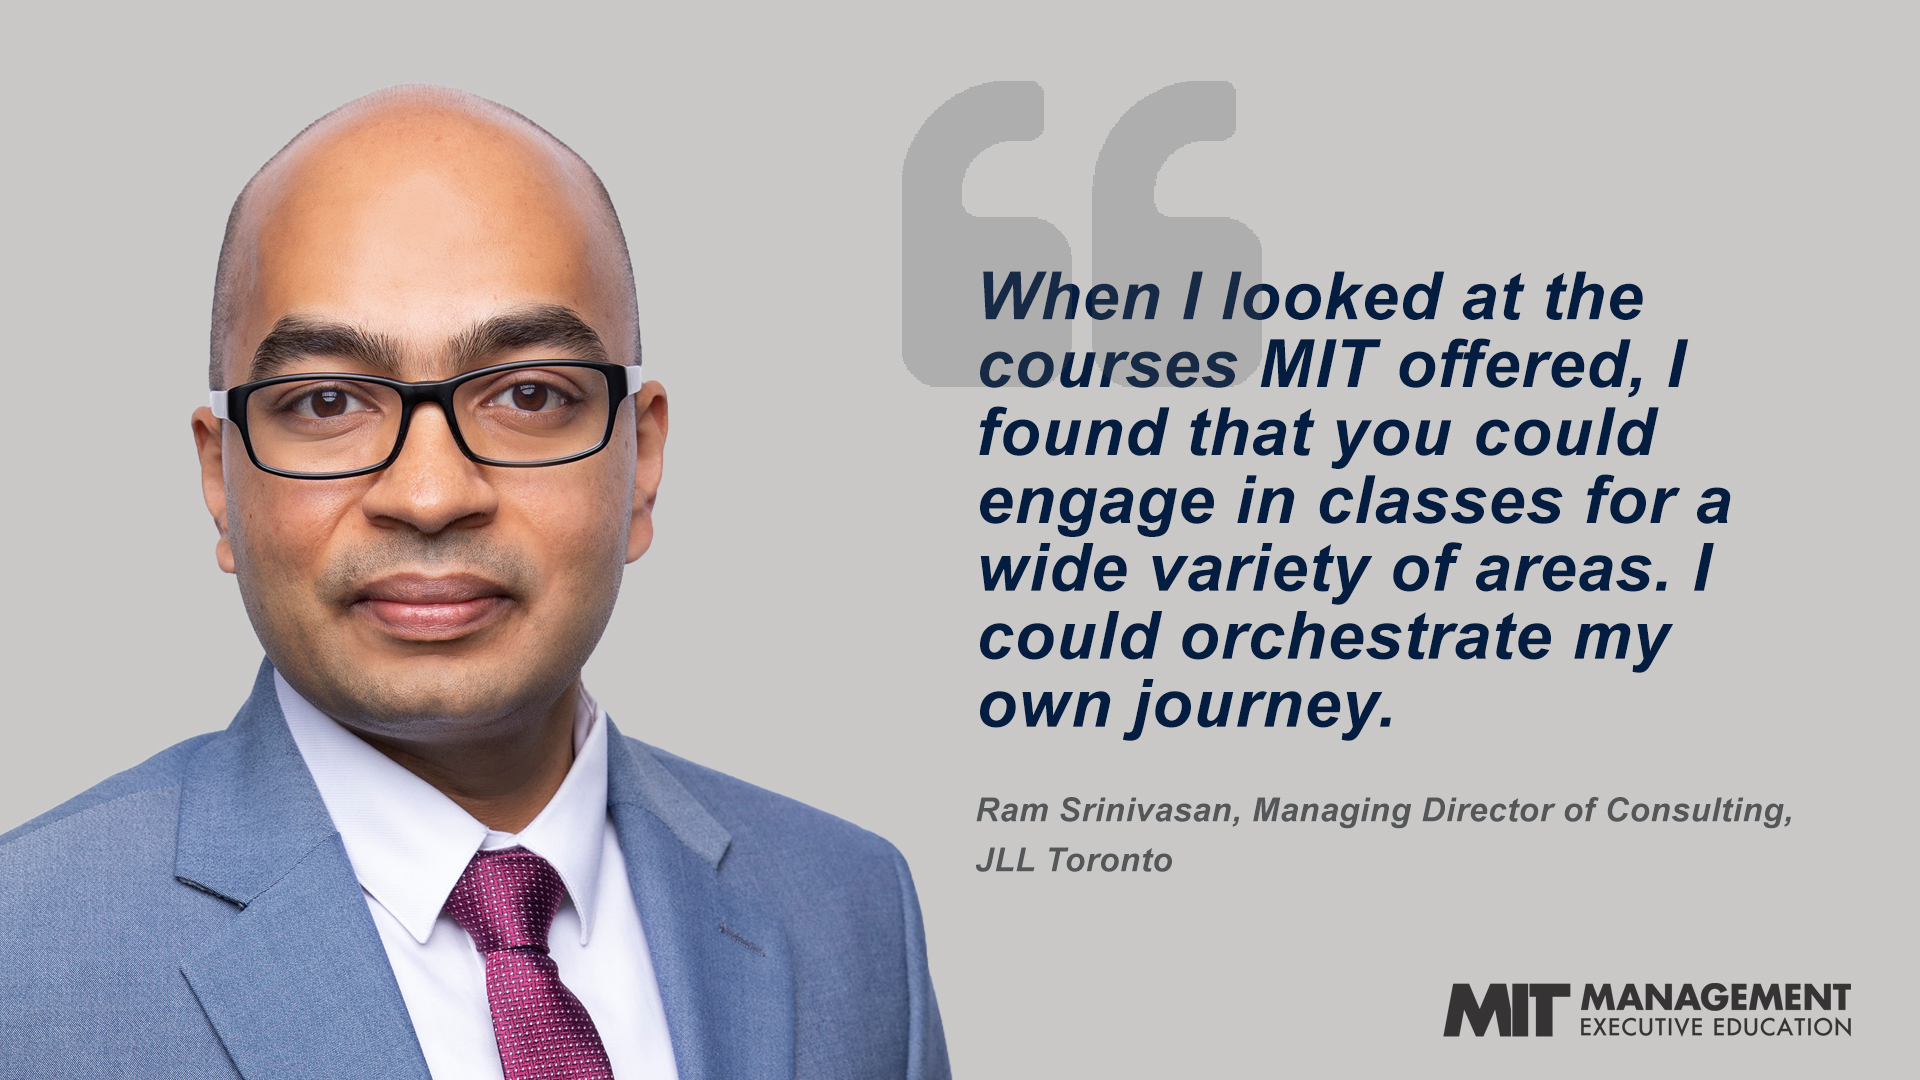 “MIT Sloan Executive Education was one of the most satisfying educational experiences of my life. I wish I had done it sooner. It offered tremendous value.” - Kevin Fee, Vice President of Engineering, Florence Corporation